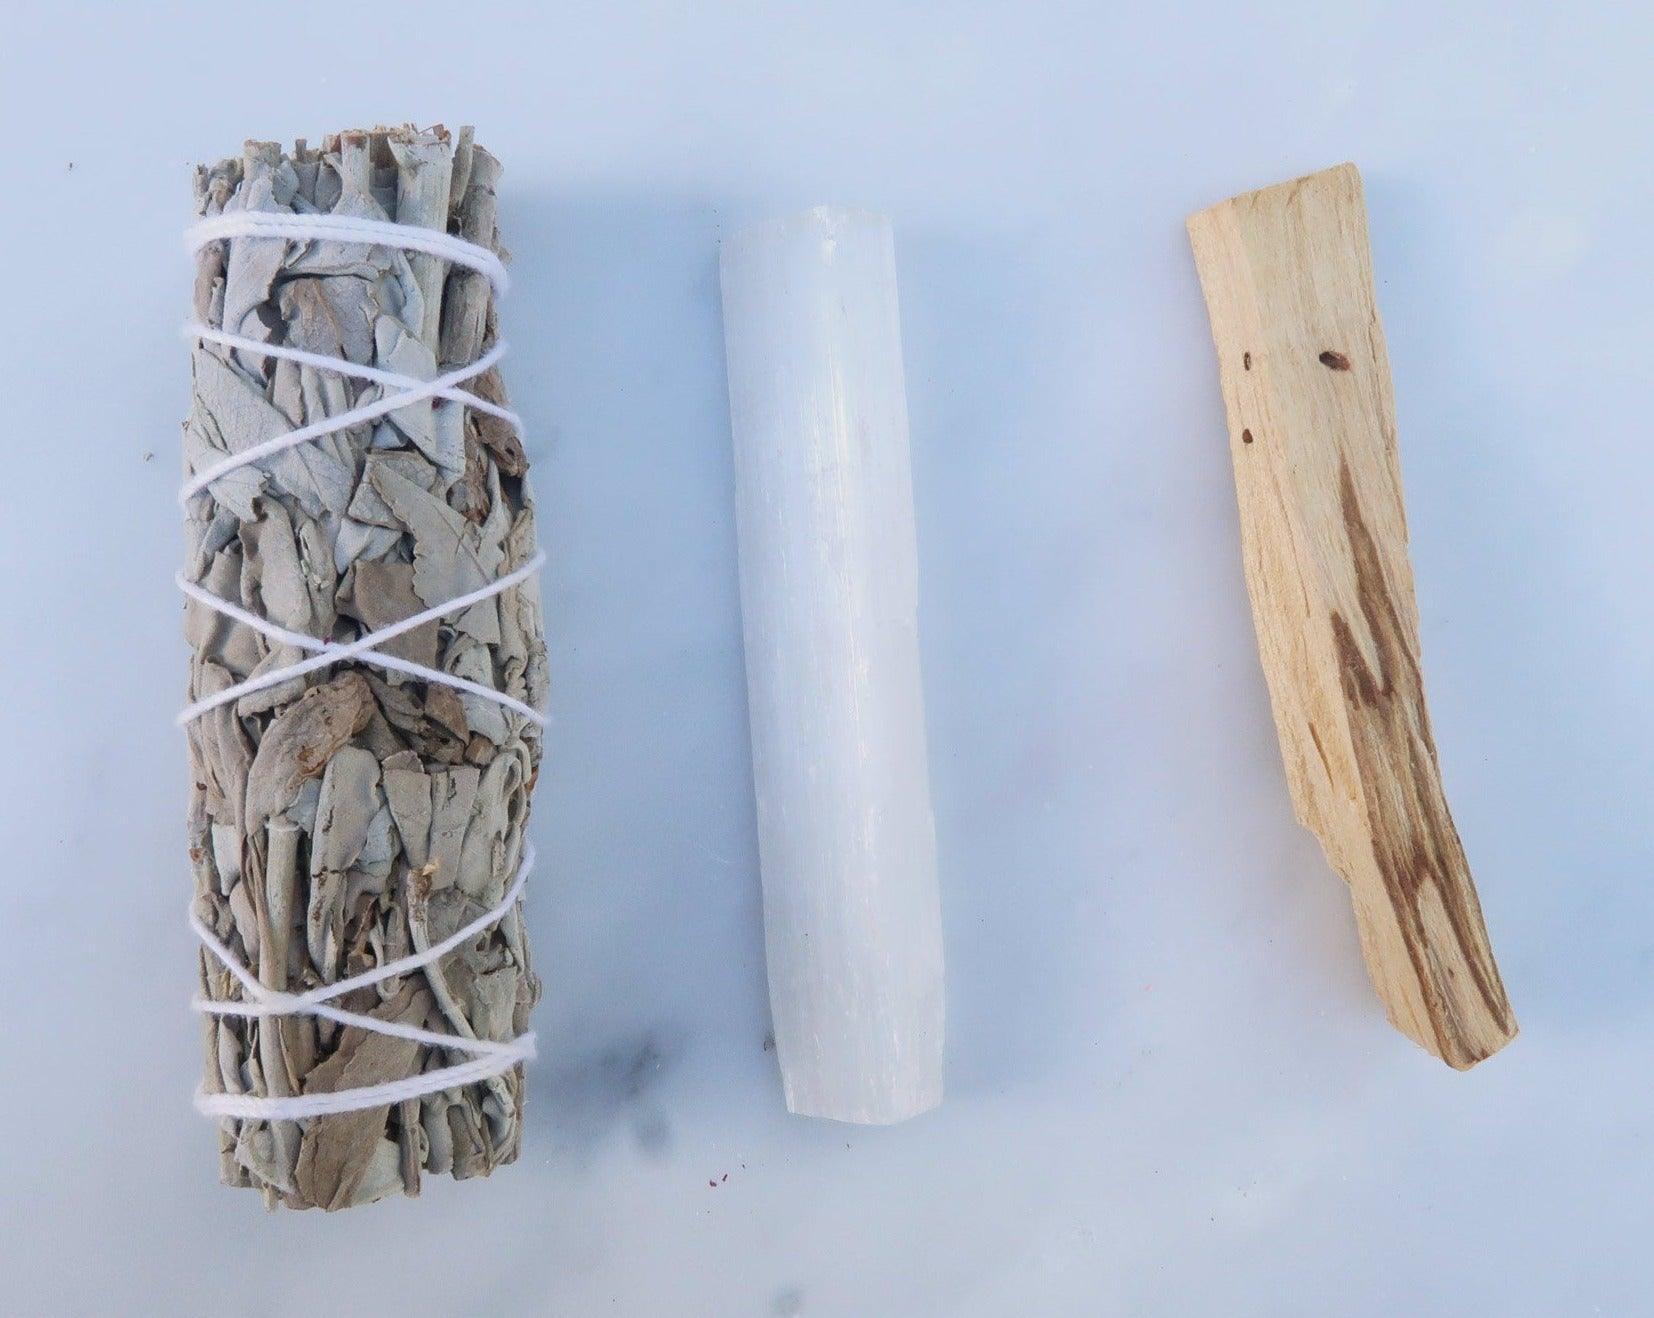 Energy cleansing kit to help you get rid or unwanted energy caused by anger, stress or anxiety. It features an organic sage stick, a selenite wand and a palo santo stick